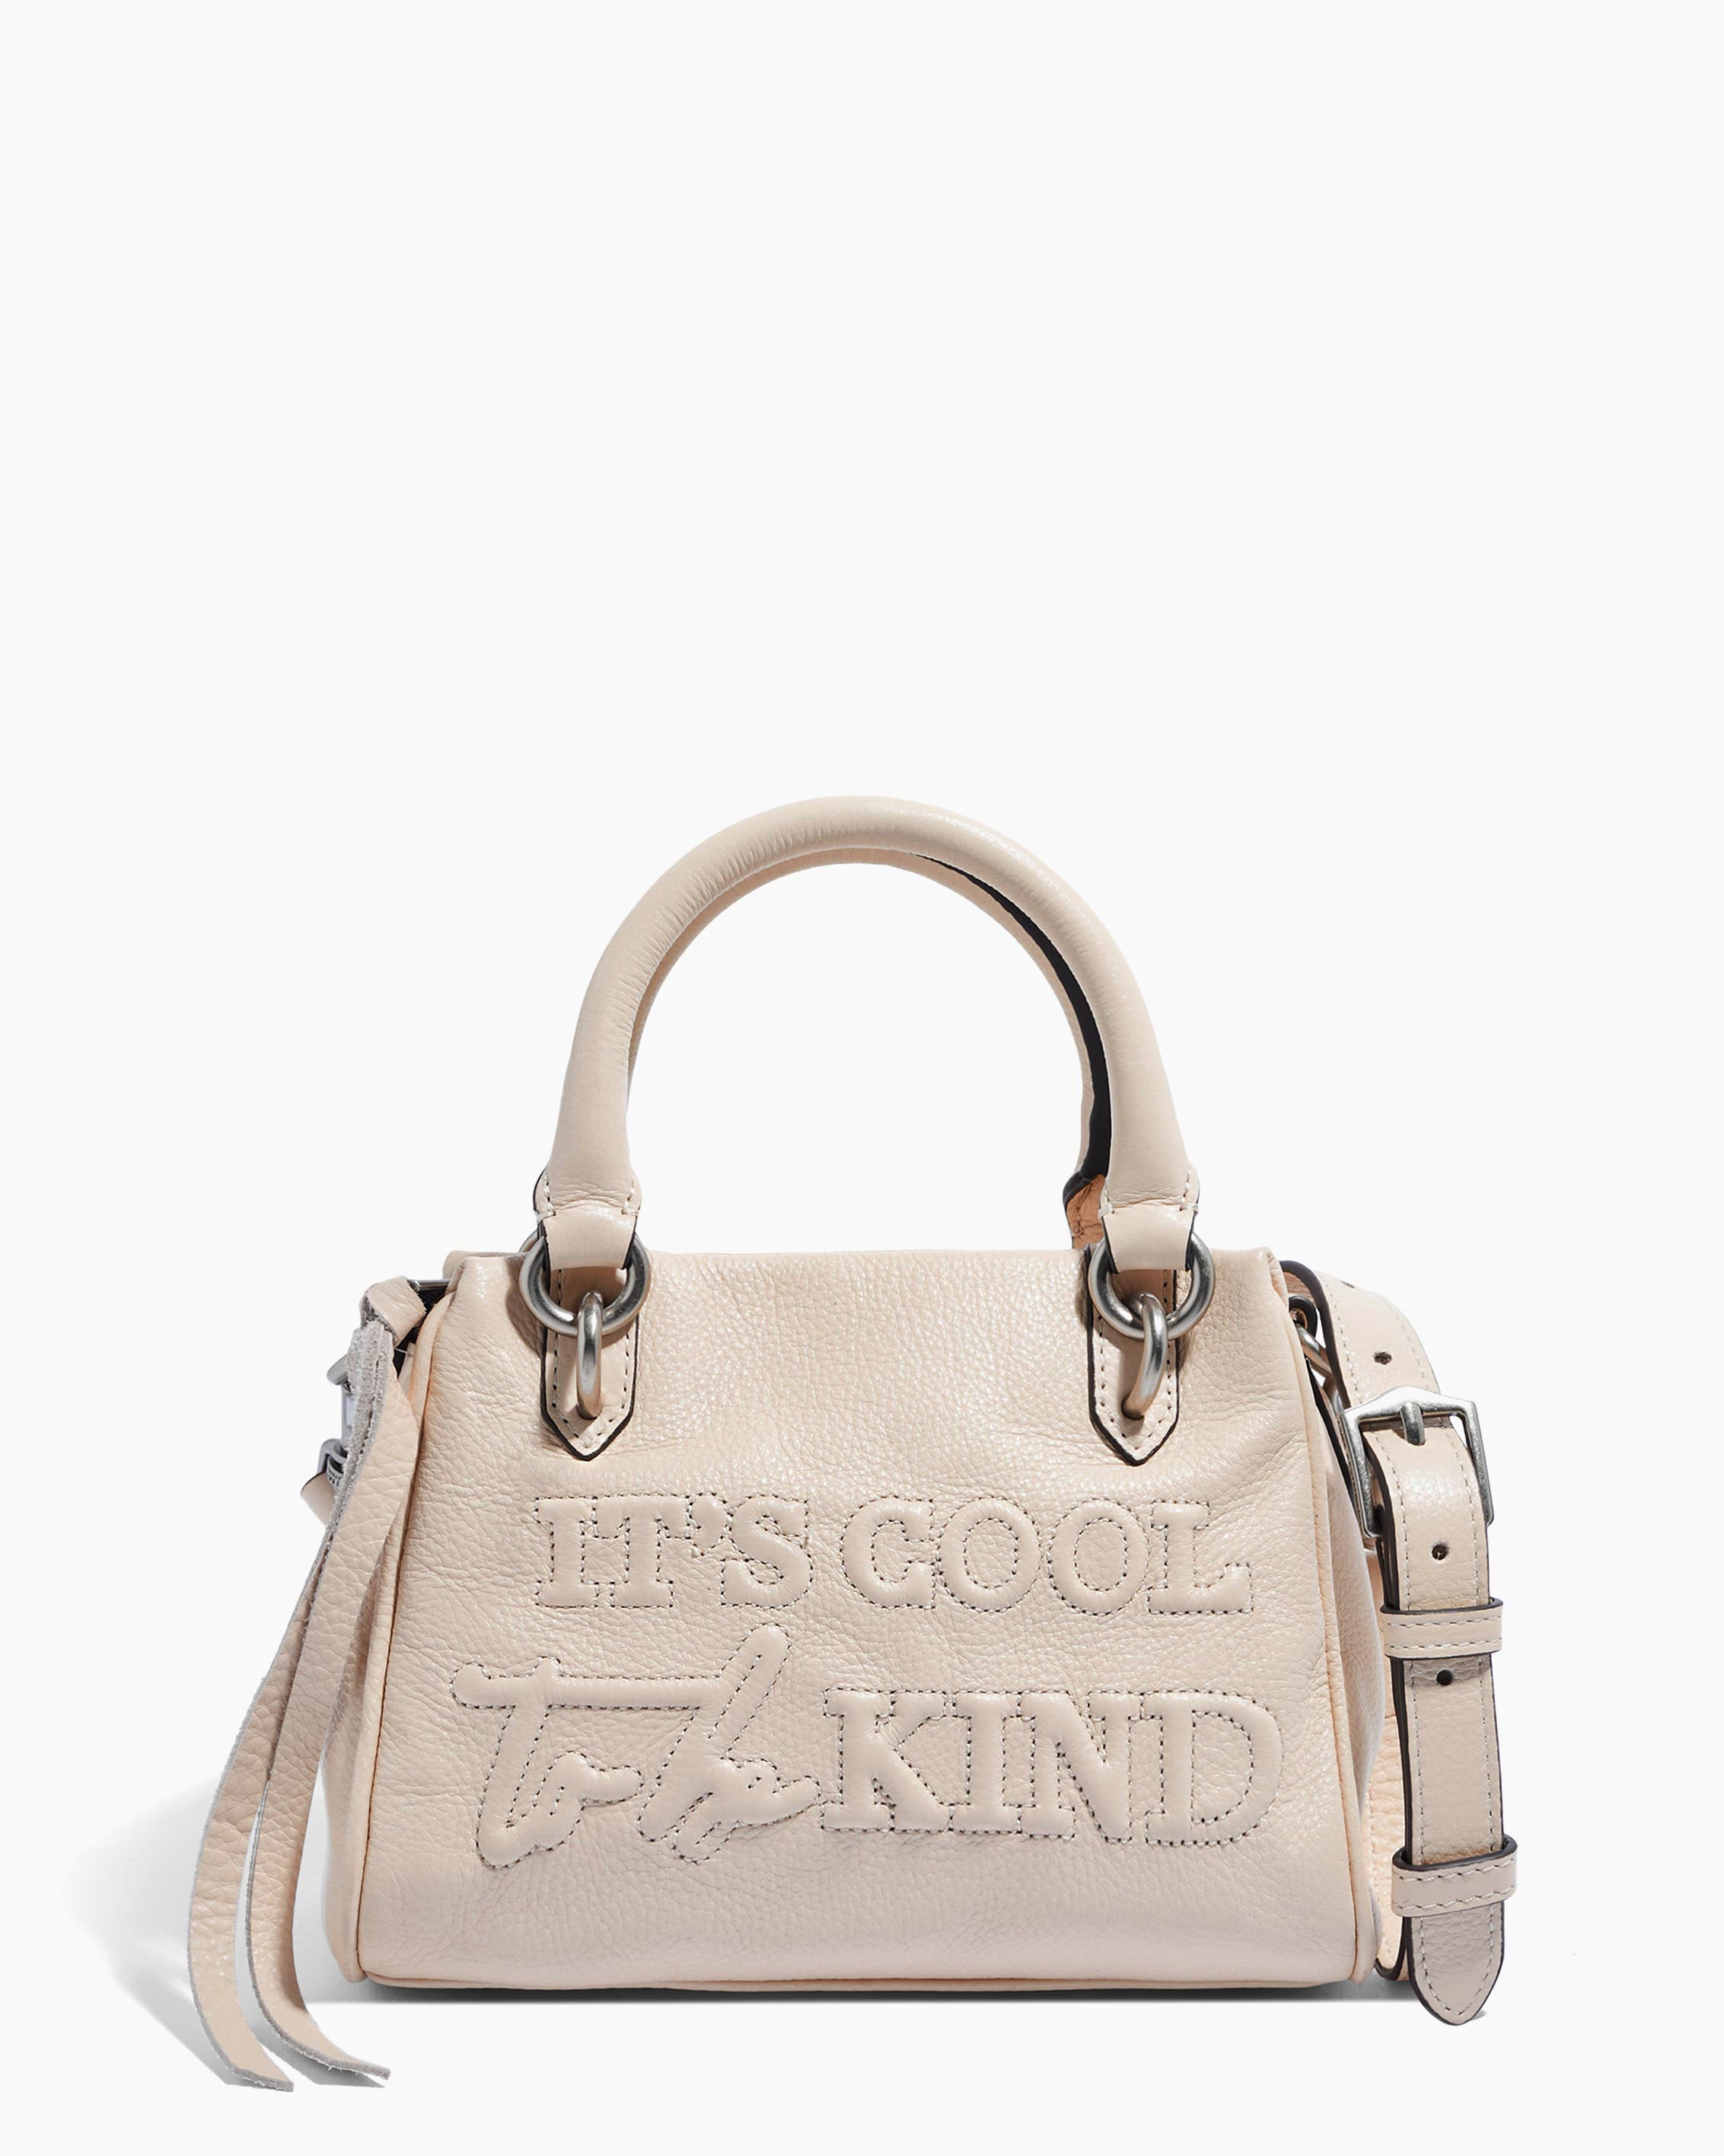 Be a stylish bag lady – these statement minis are perfect for